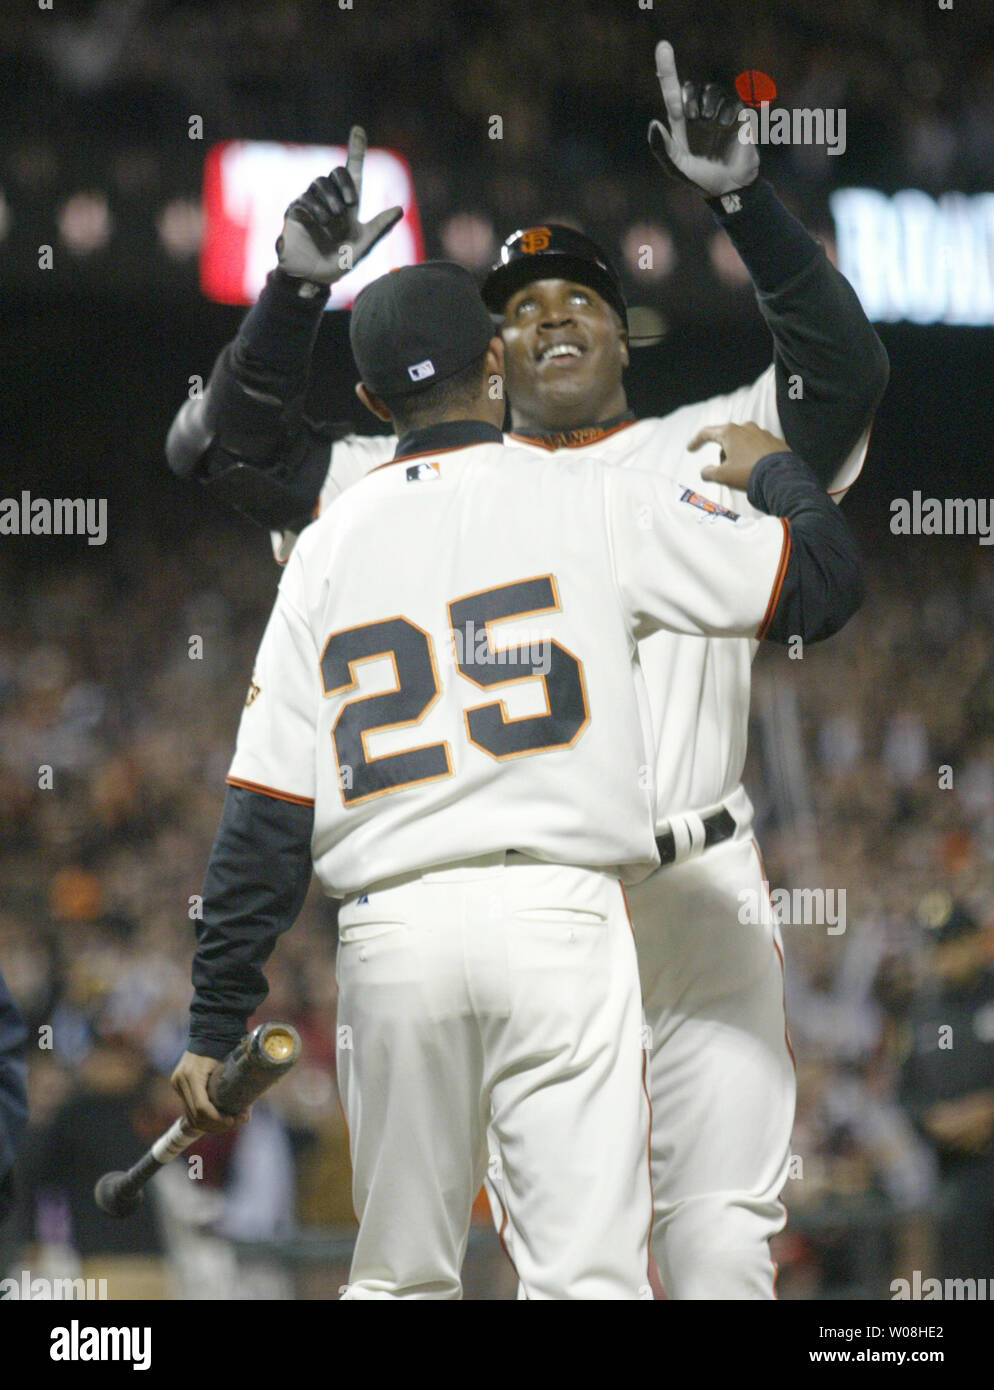 San Francisco Giants Barry Bonds celebrates at home plate with his son Nikolai after hitting his 756th career home run passing Hank Aaron for the all time home run record against the Washington Nationals at AT&T Park in San Francisco on August 7, 2007.    (UPI Photo/Bruce Gordon) Stock Photo